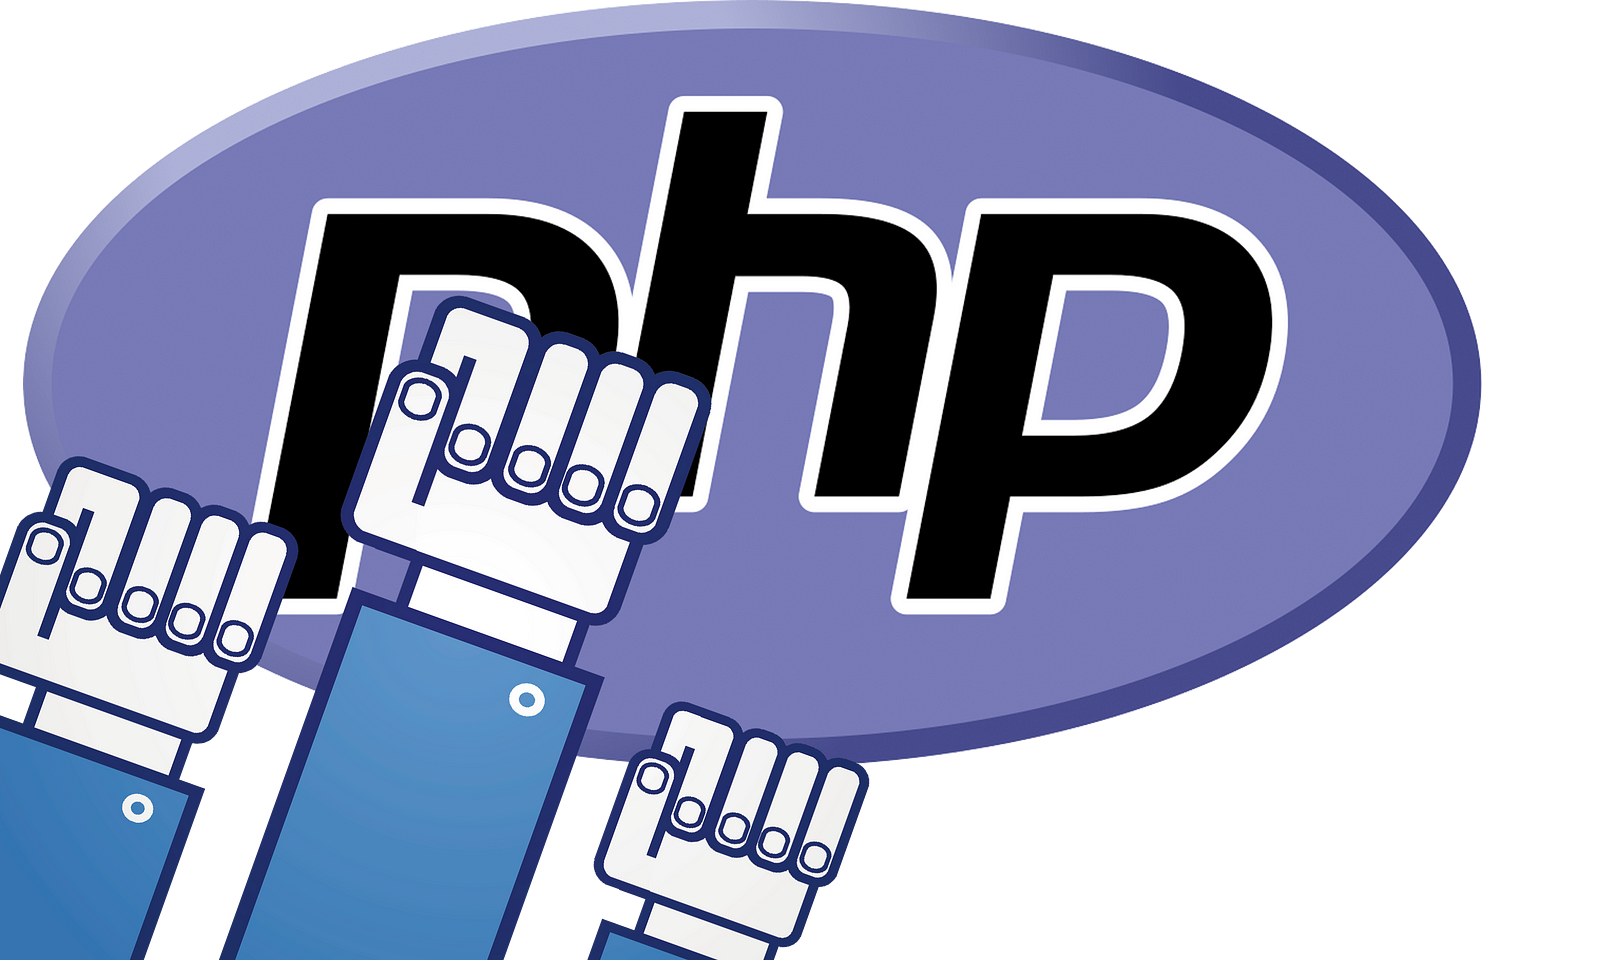 Php logo. Php картинка. Php 7 logo. Php логотип в стиле. Php логотип 8.0.